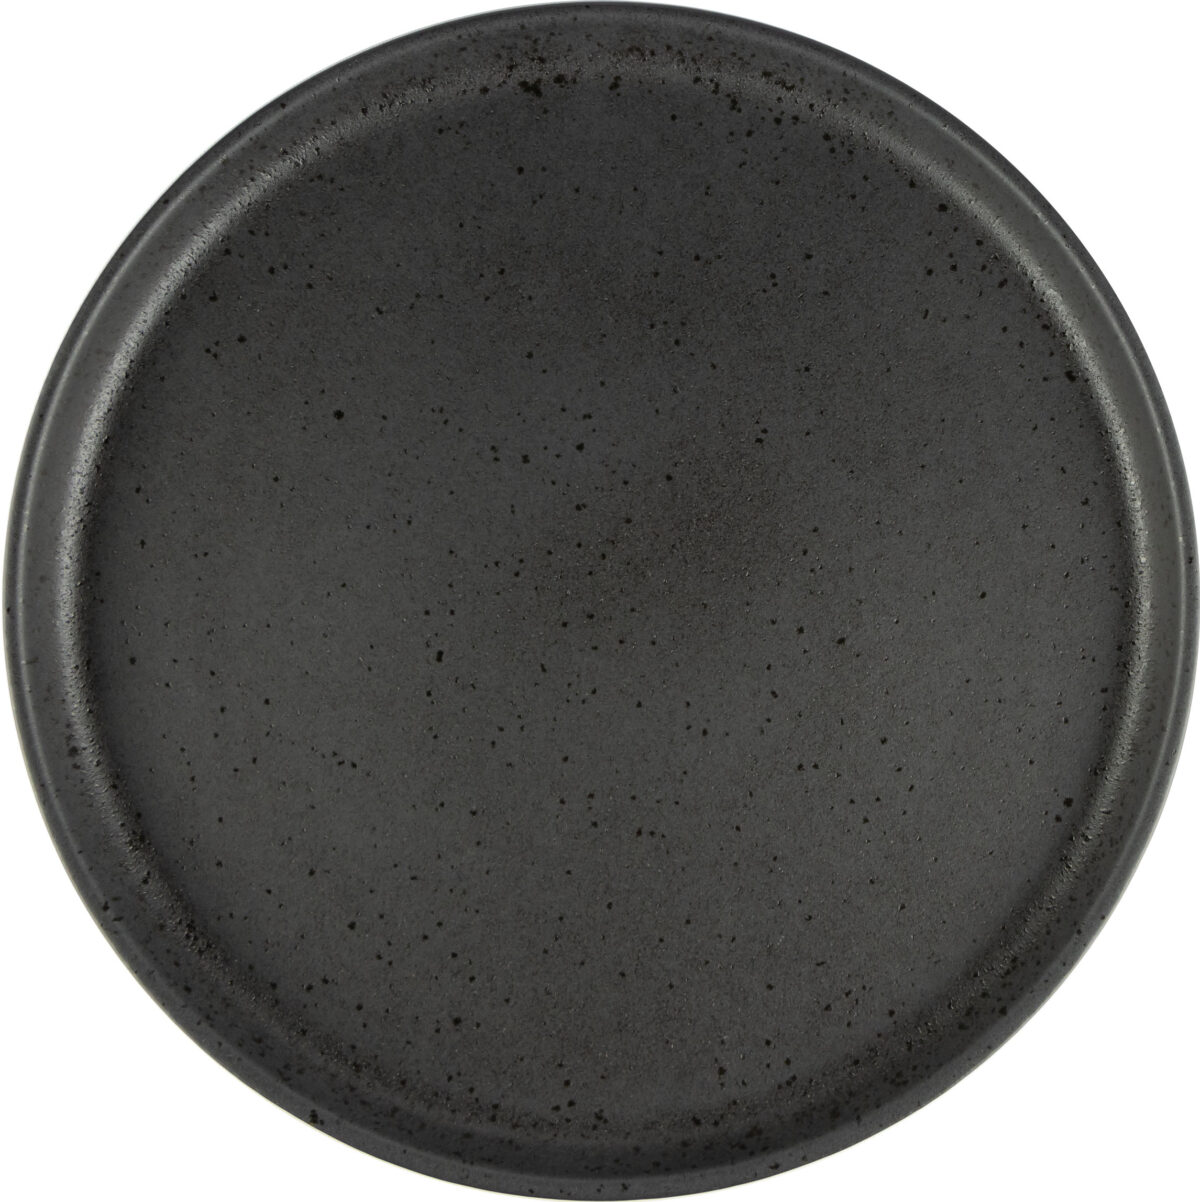 Uno dinner plate 28 Speckle Noire